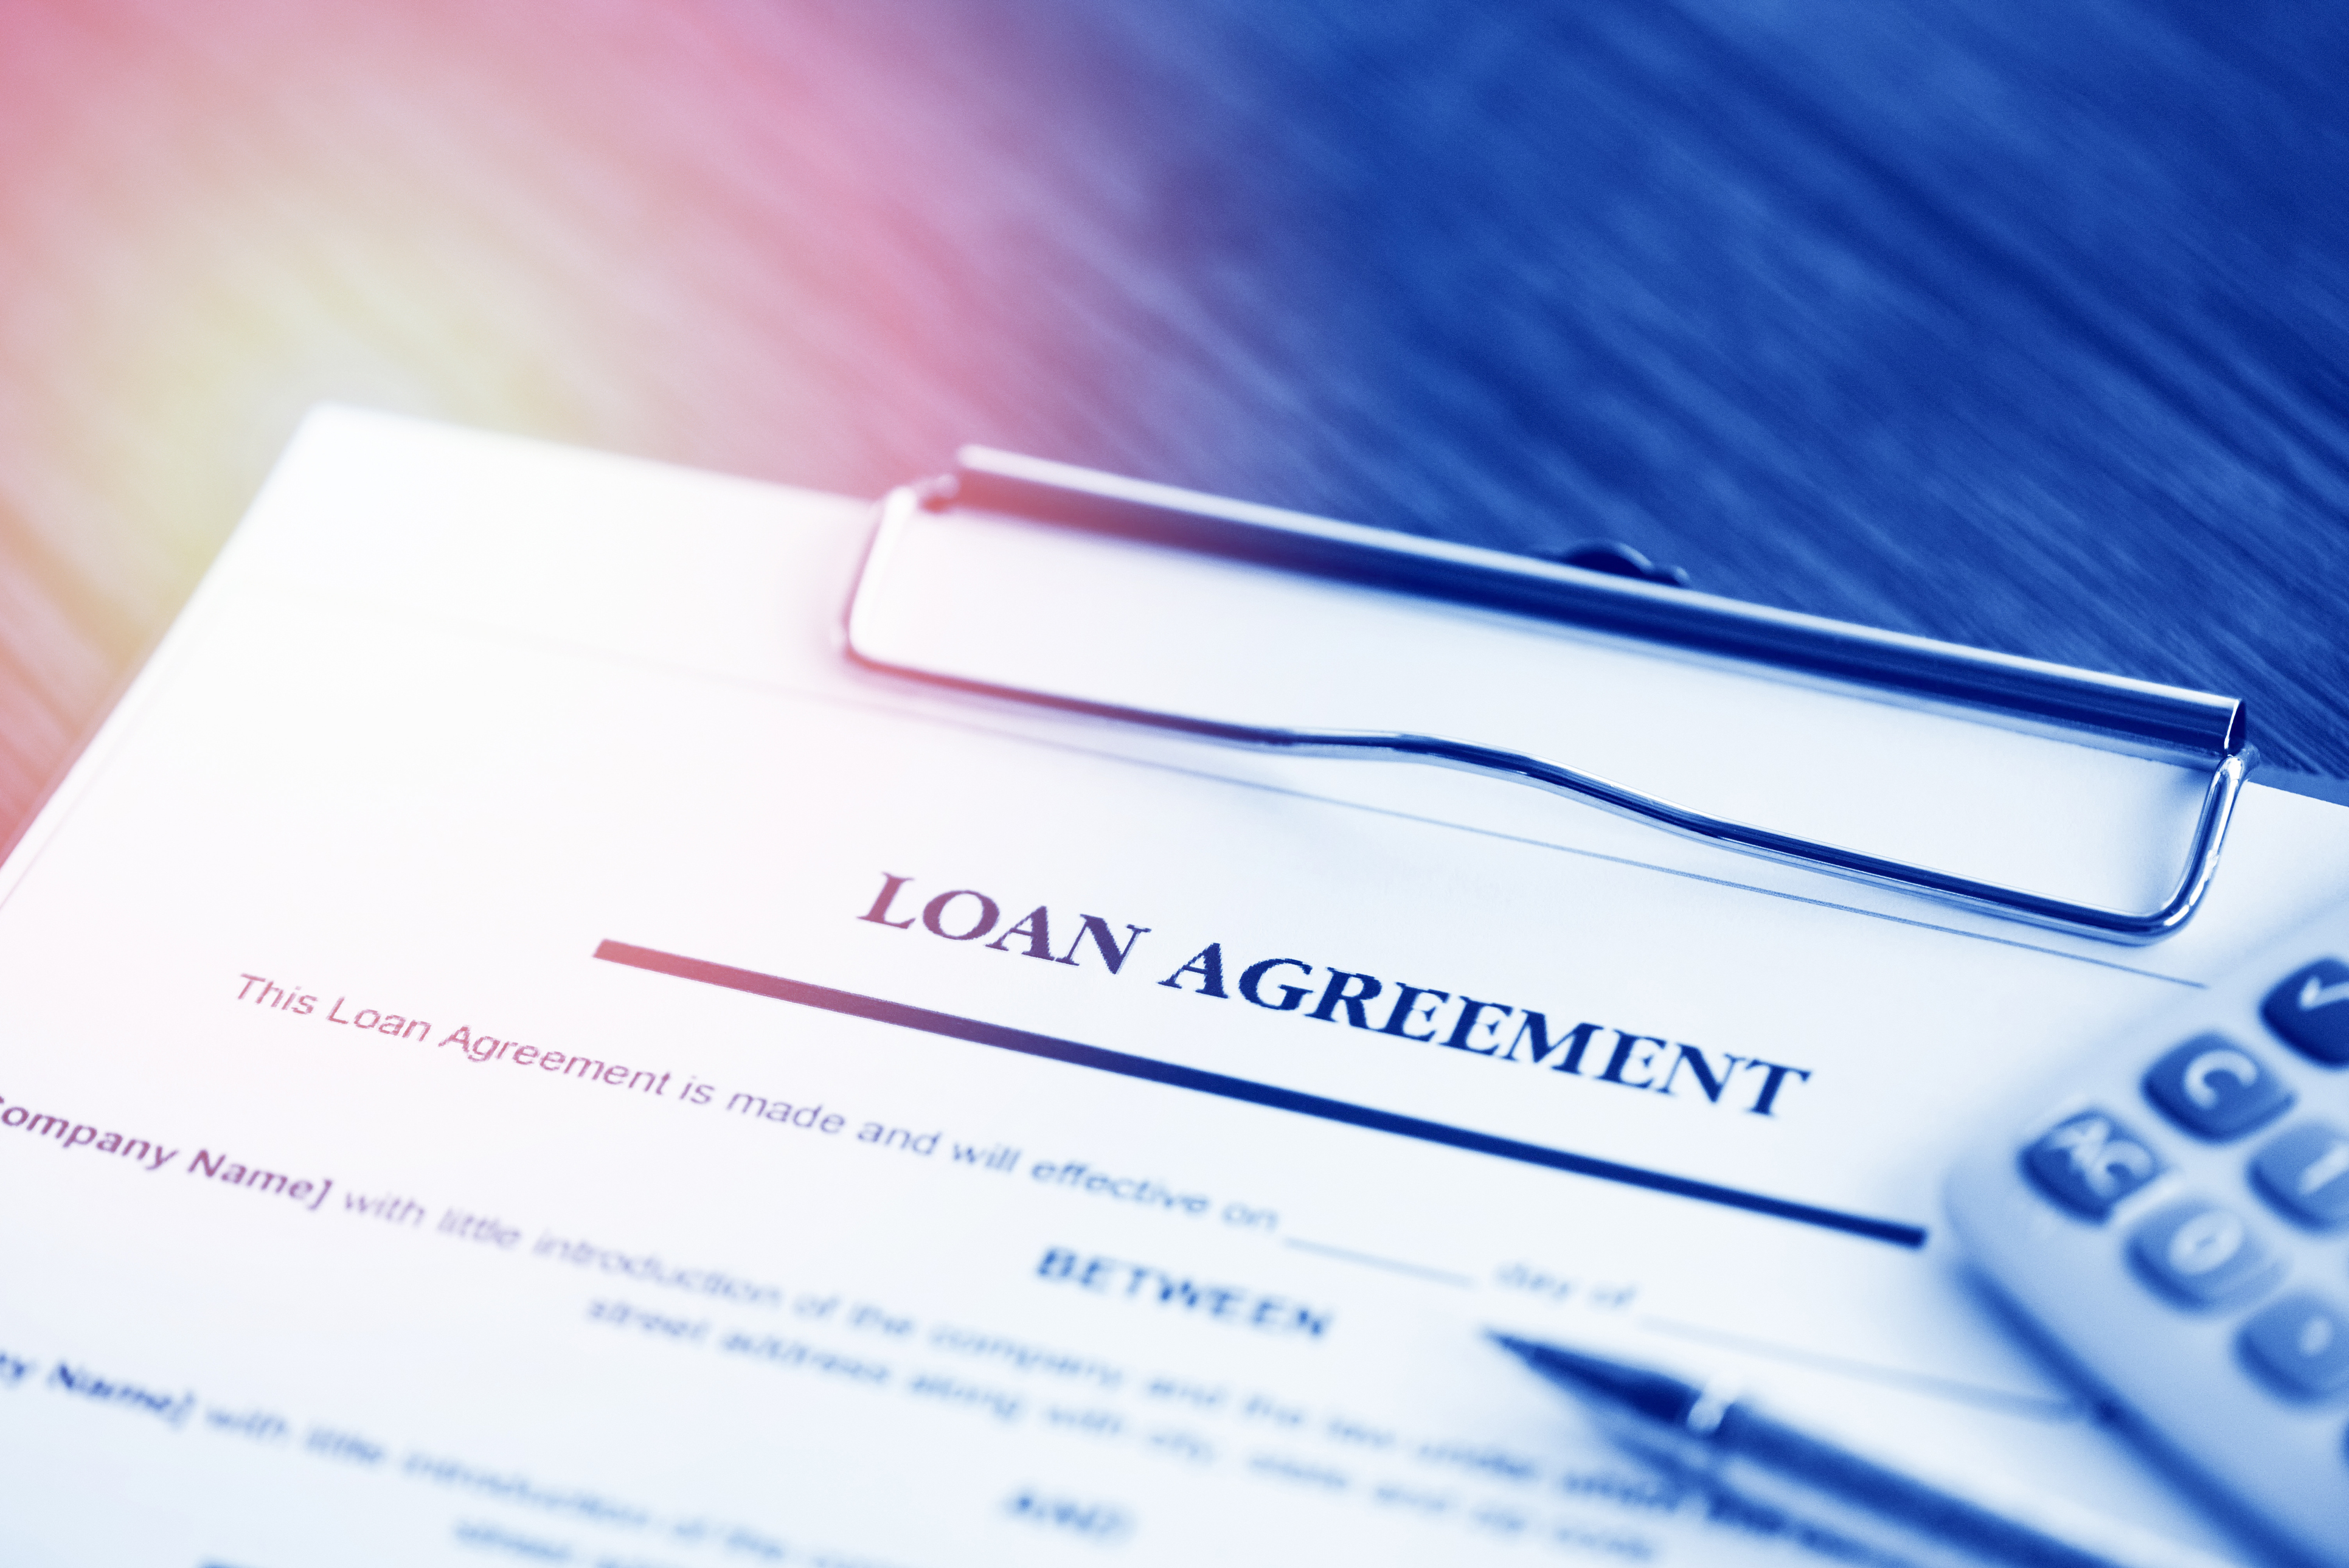 Loan agreement contract